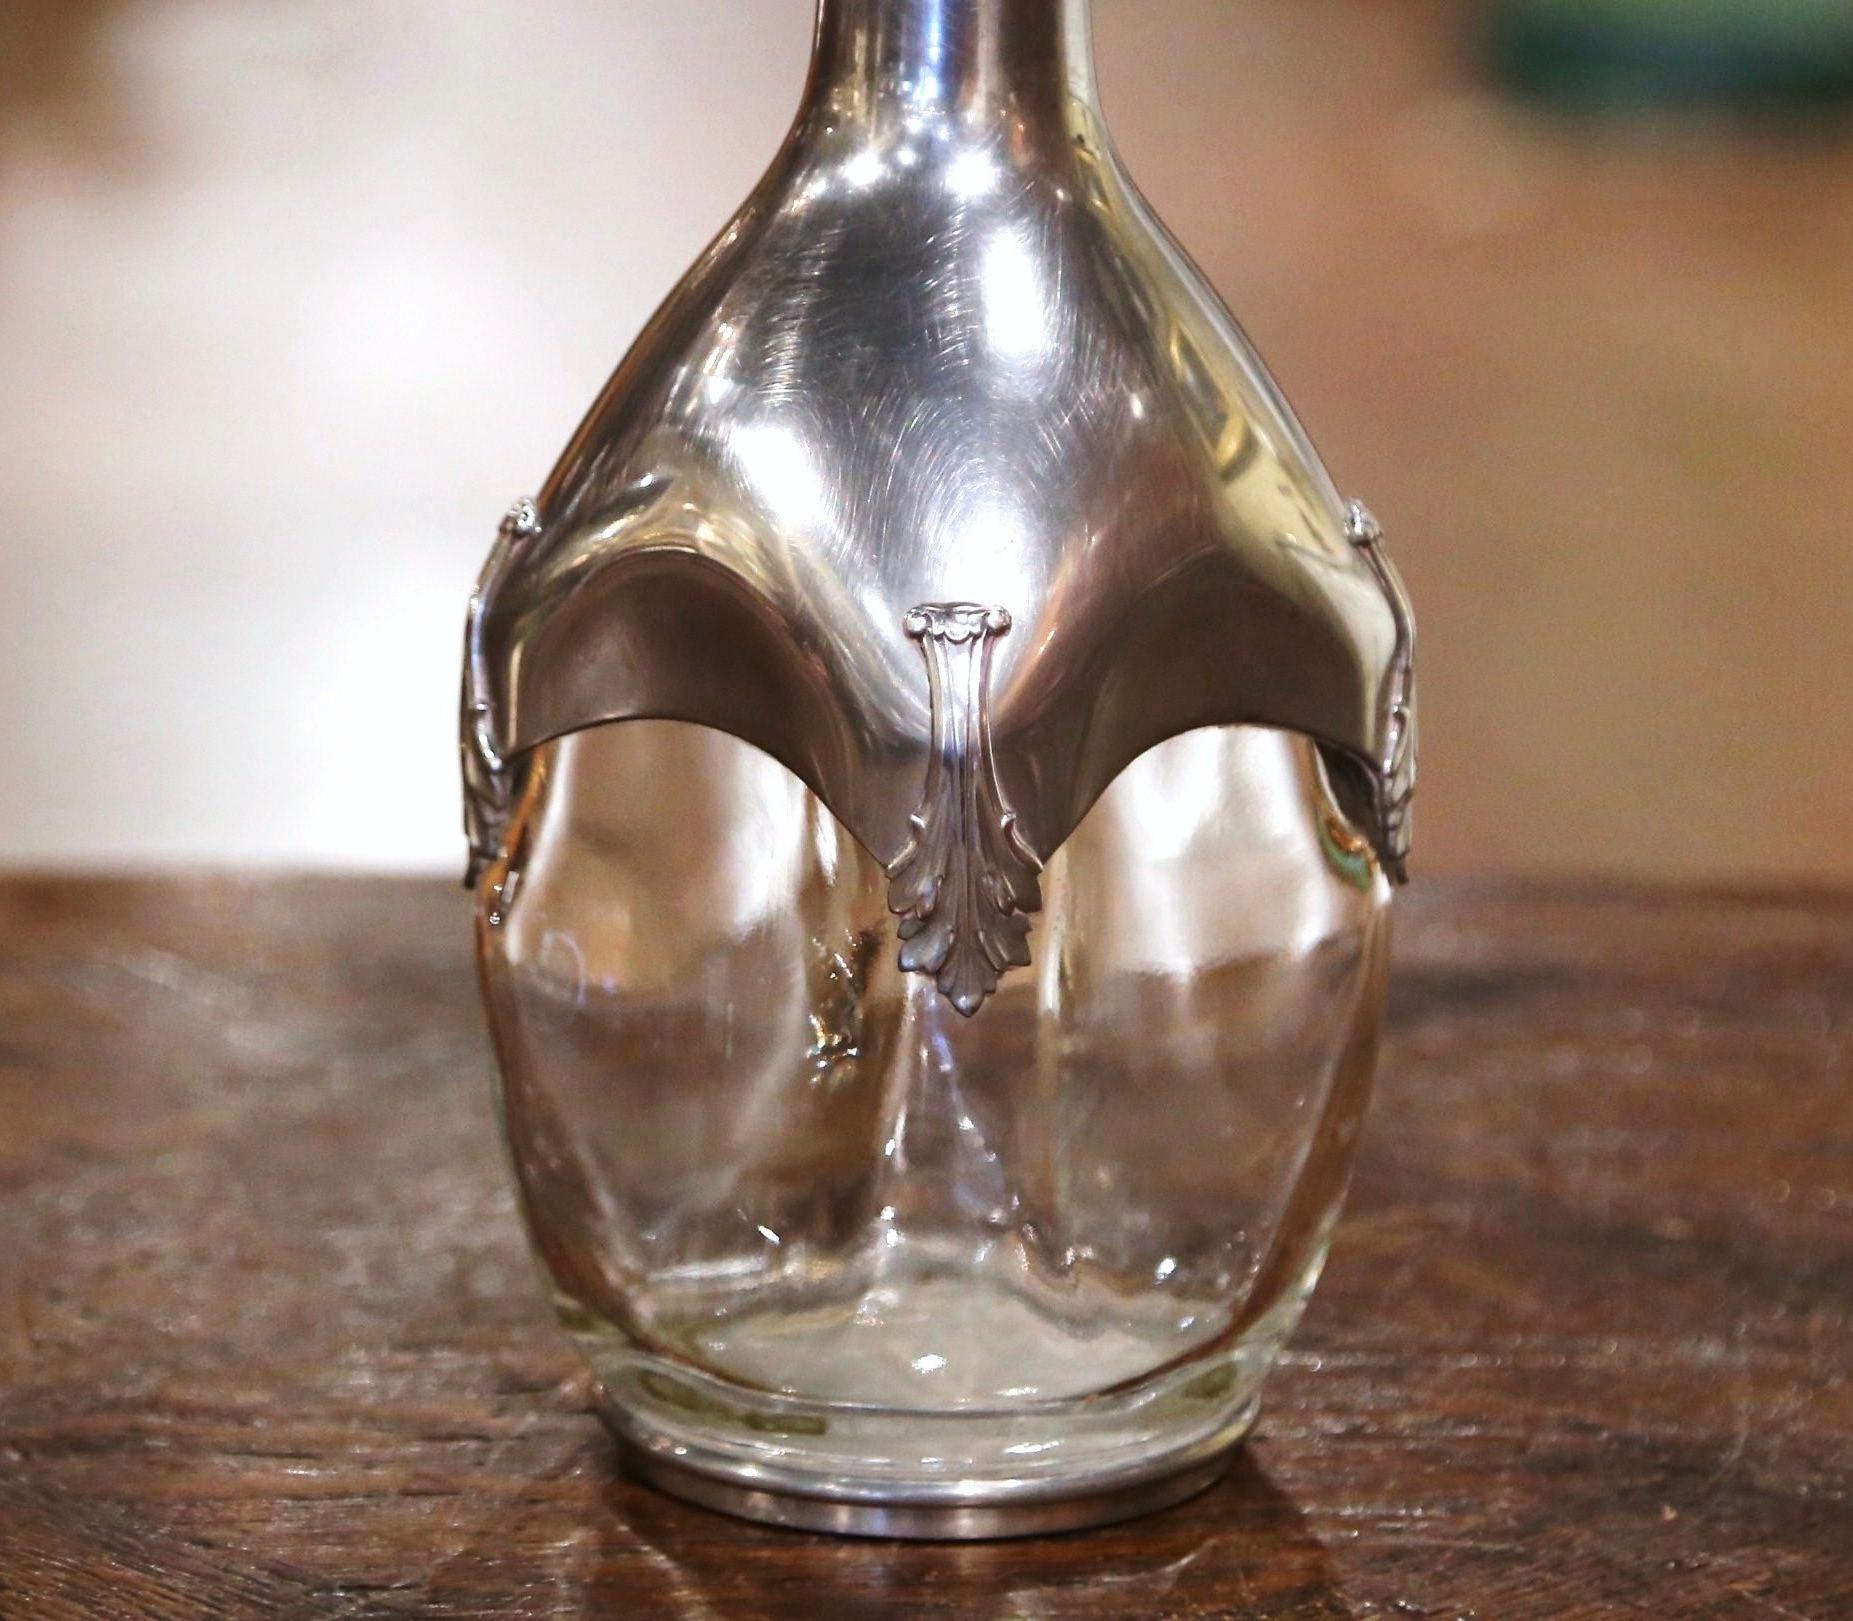 Serve your favorite Bordeaux with style in this elegant antique decanter. Crafted in France circa 1920, the carafe stands on a round silver base over the blown glass, and dressed with a silvered pewter coat decorated with repousse acanthus leaf